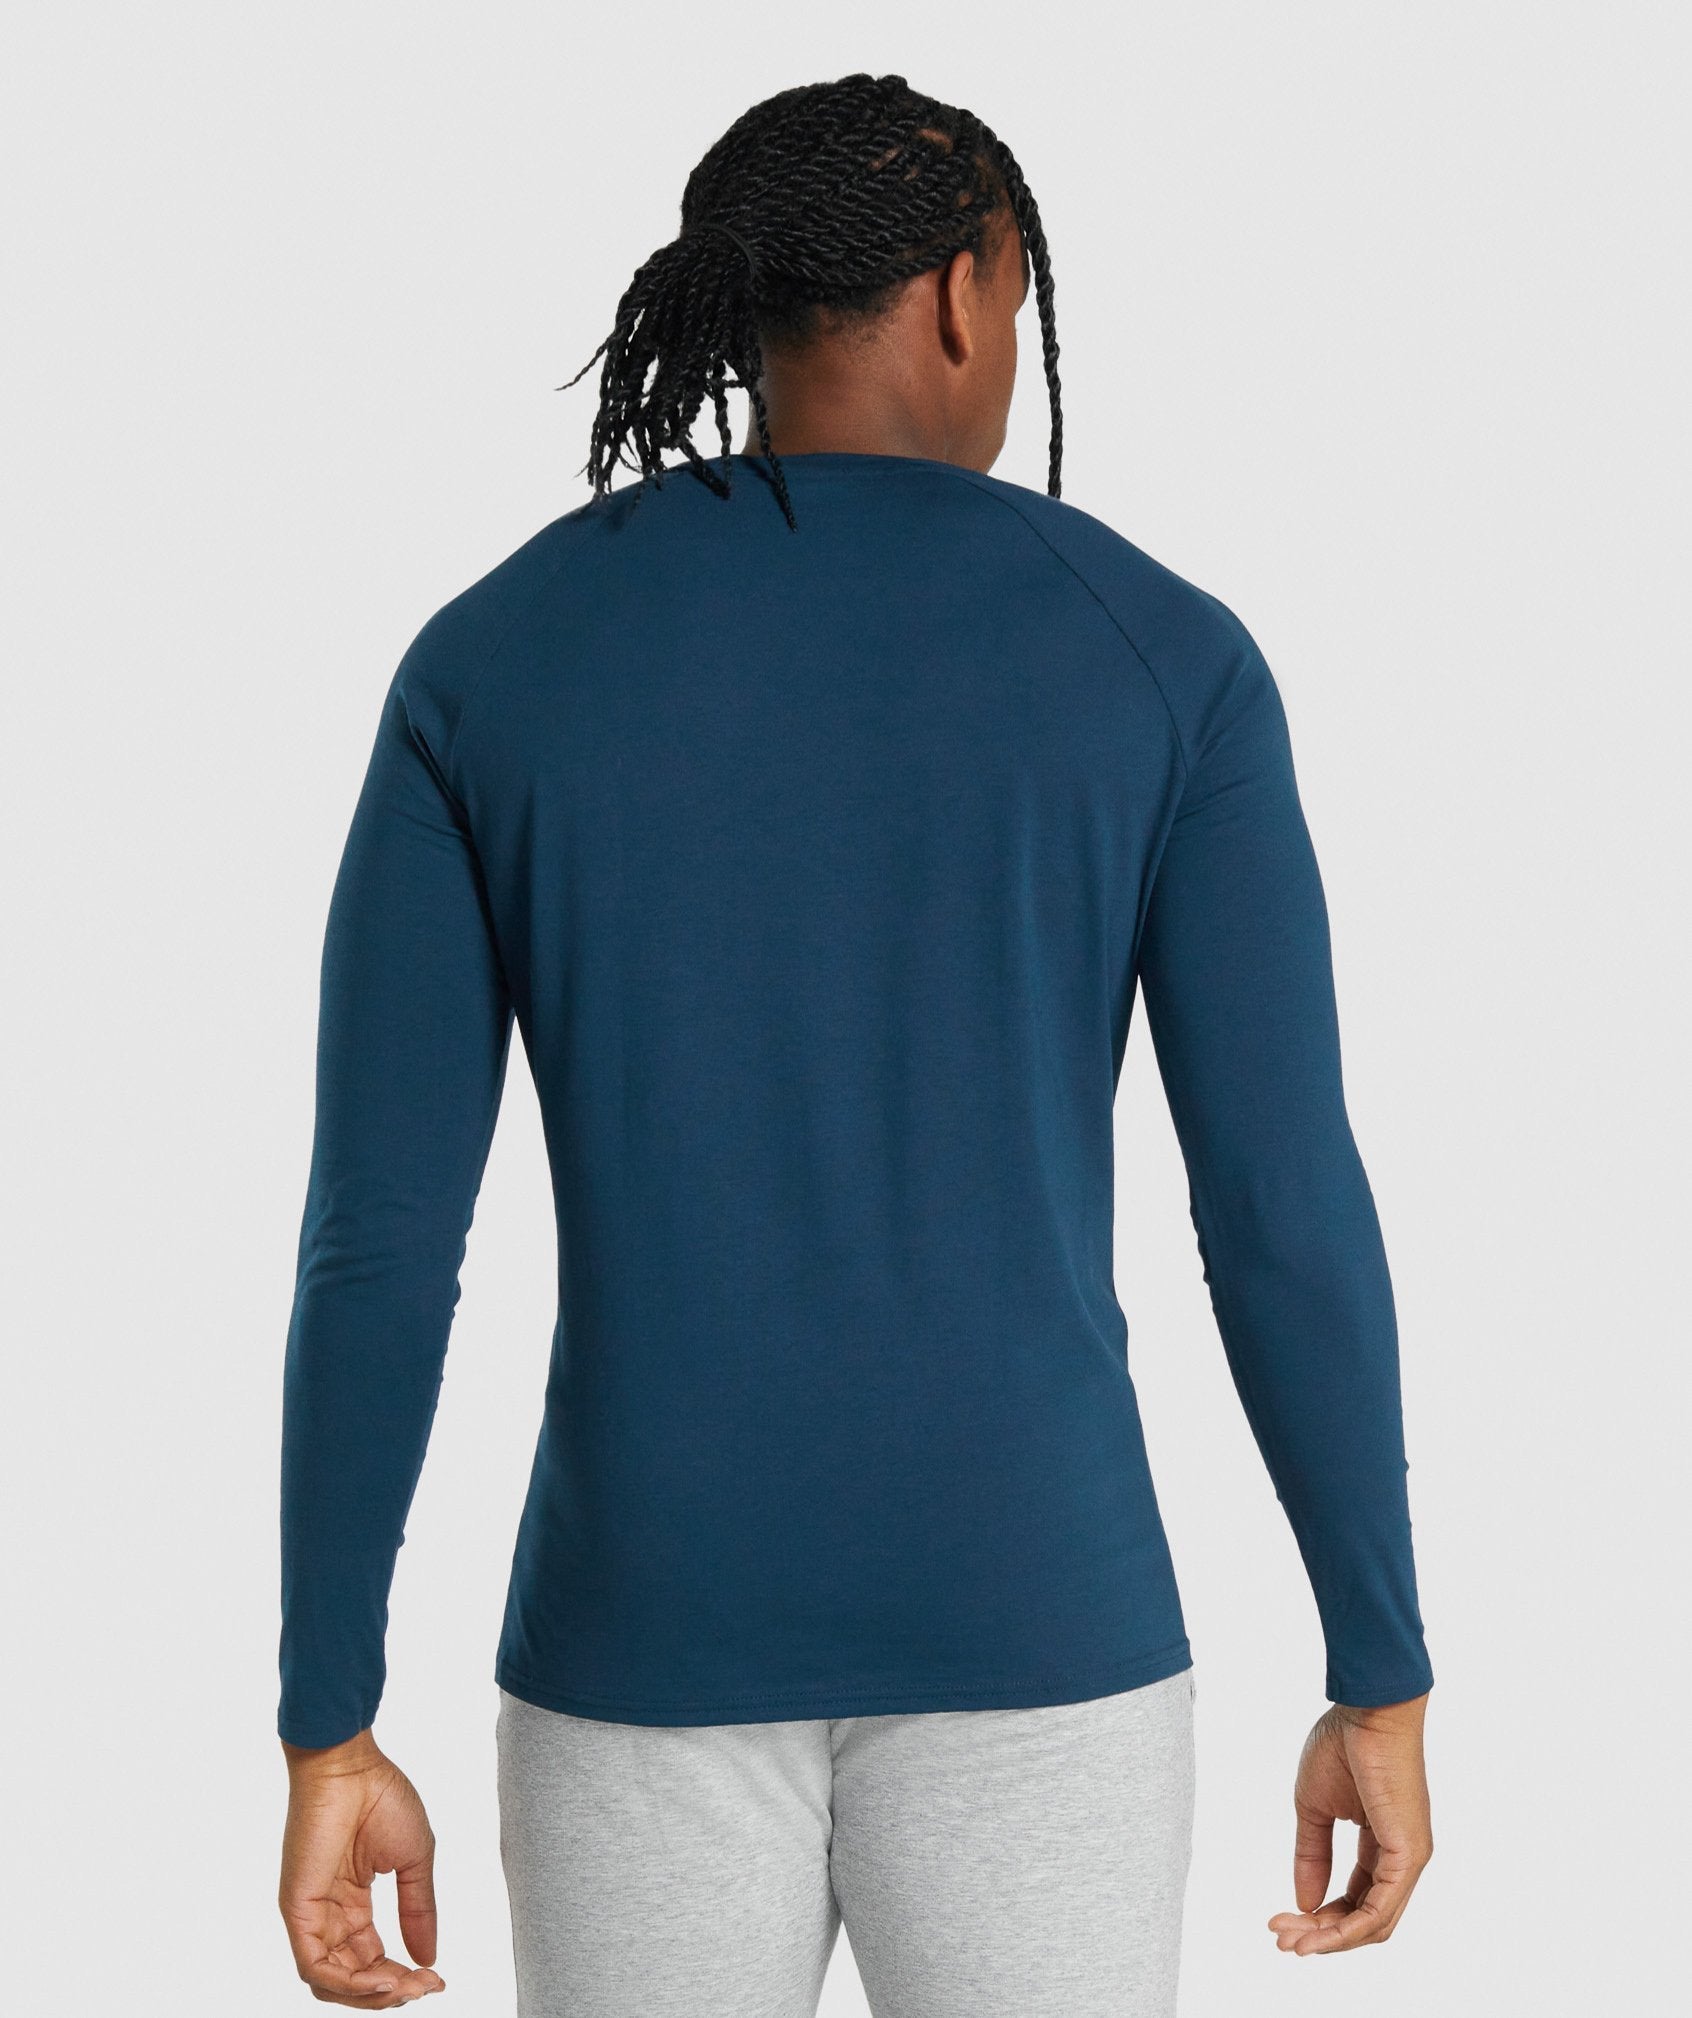 Critical 2.0 Long Sleeve T-Shirt in Navy - view 3